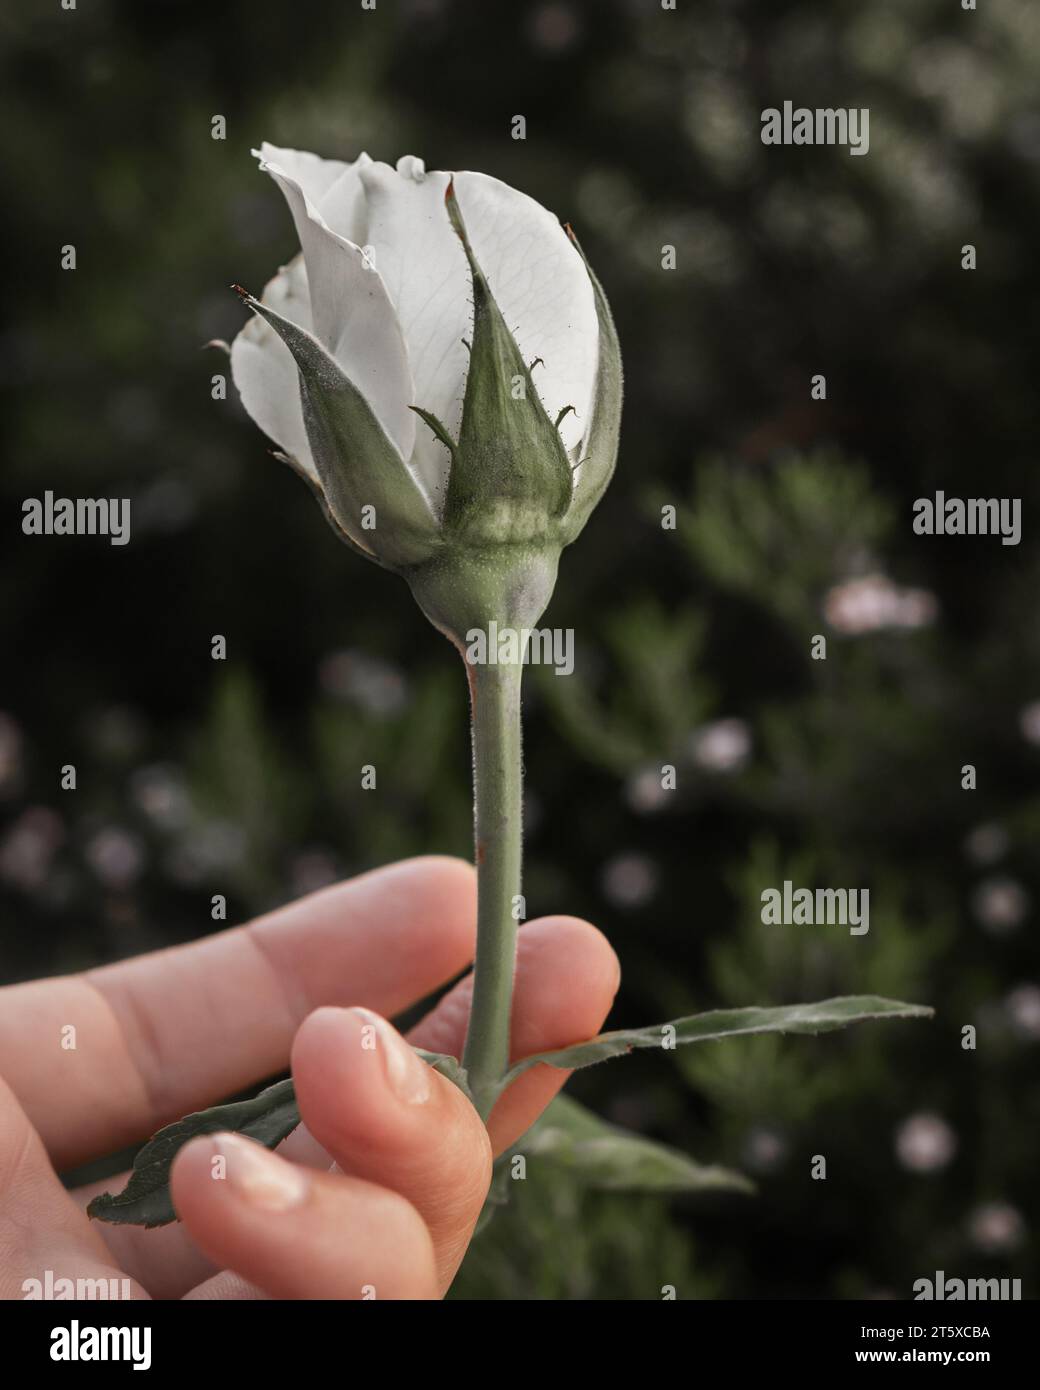 Woman's hand picking a white rose bud in garden. Focus on foreground with blurred green leaves and flowers in the background. Moody tones Stock Photo